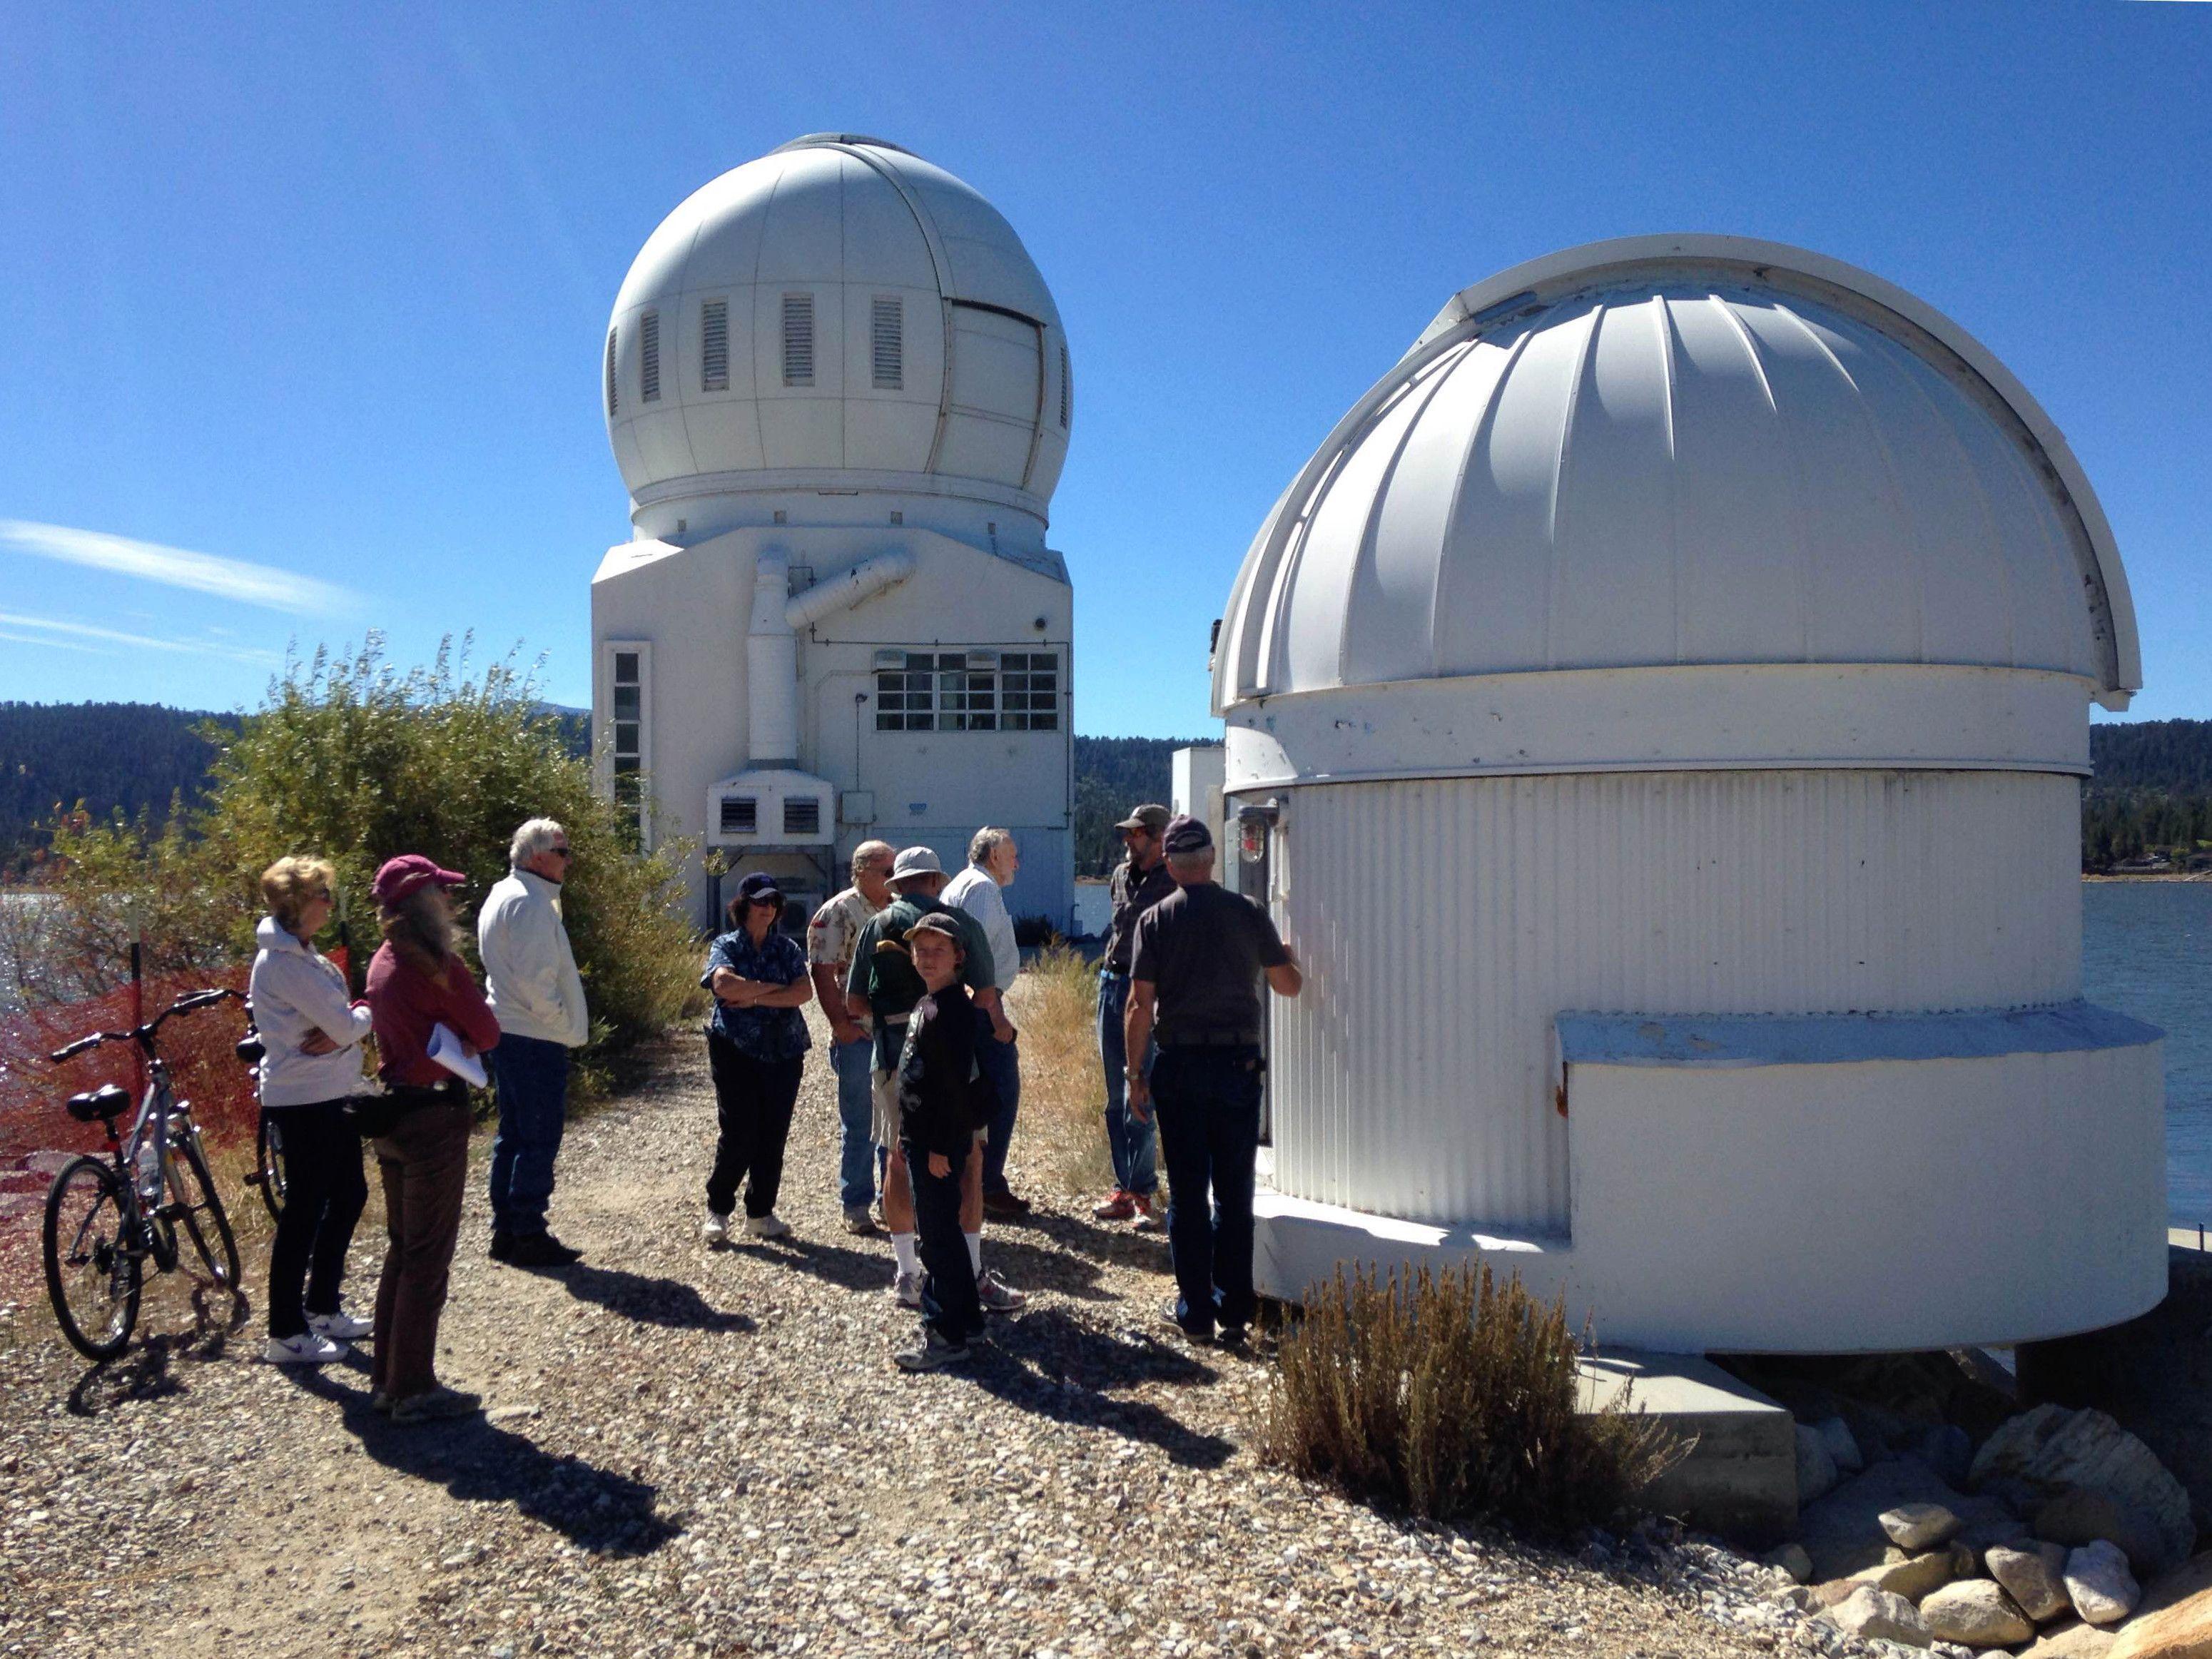 Amateur astronomy observing domes